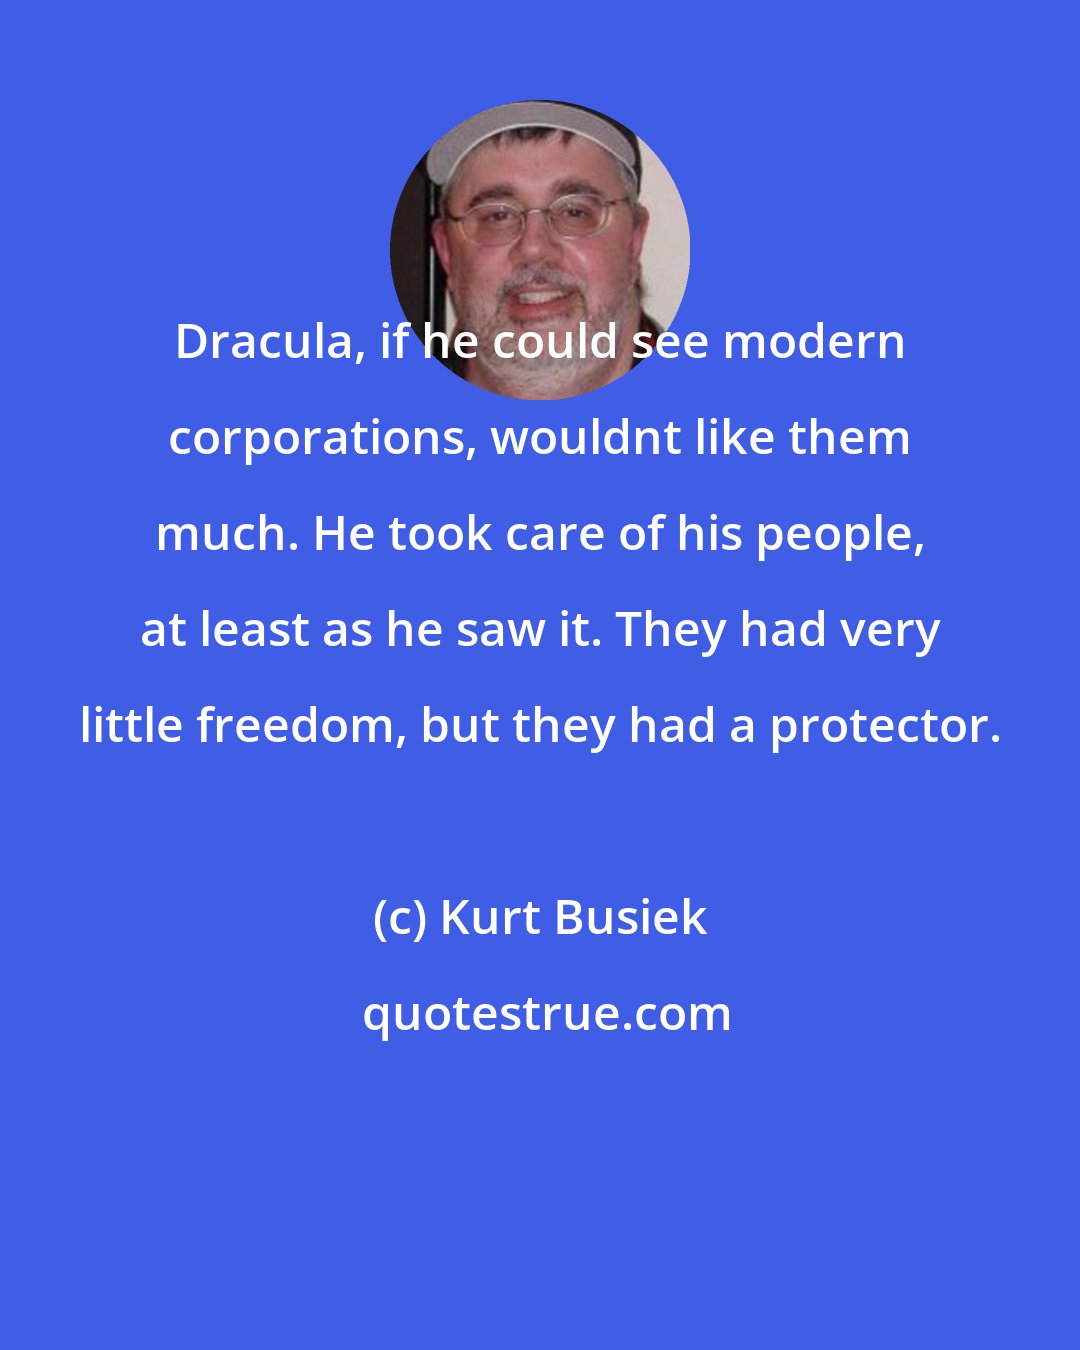 Kurt Busiek: Dracula, if he could see modern corporations, wouldnt like them much. He took care of his people, at least as he saw it. They had very little freedom, but they had a protector.